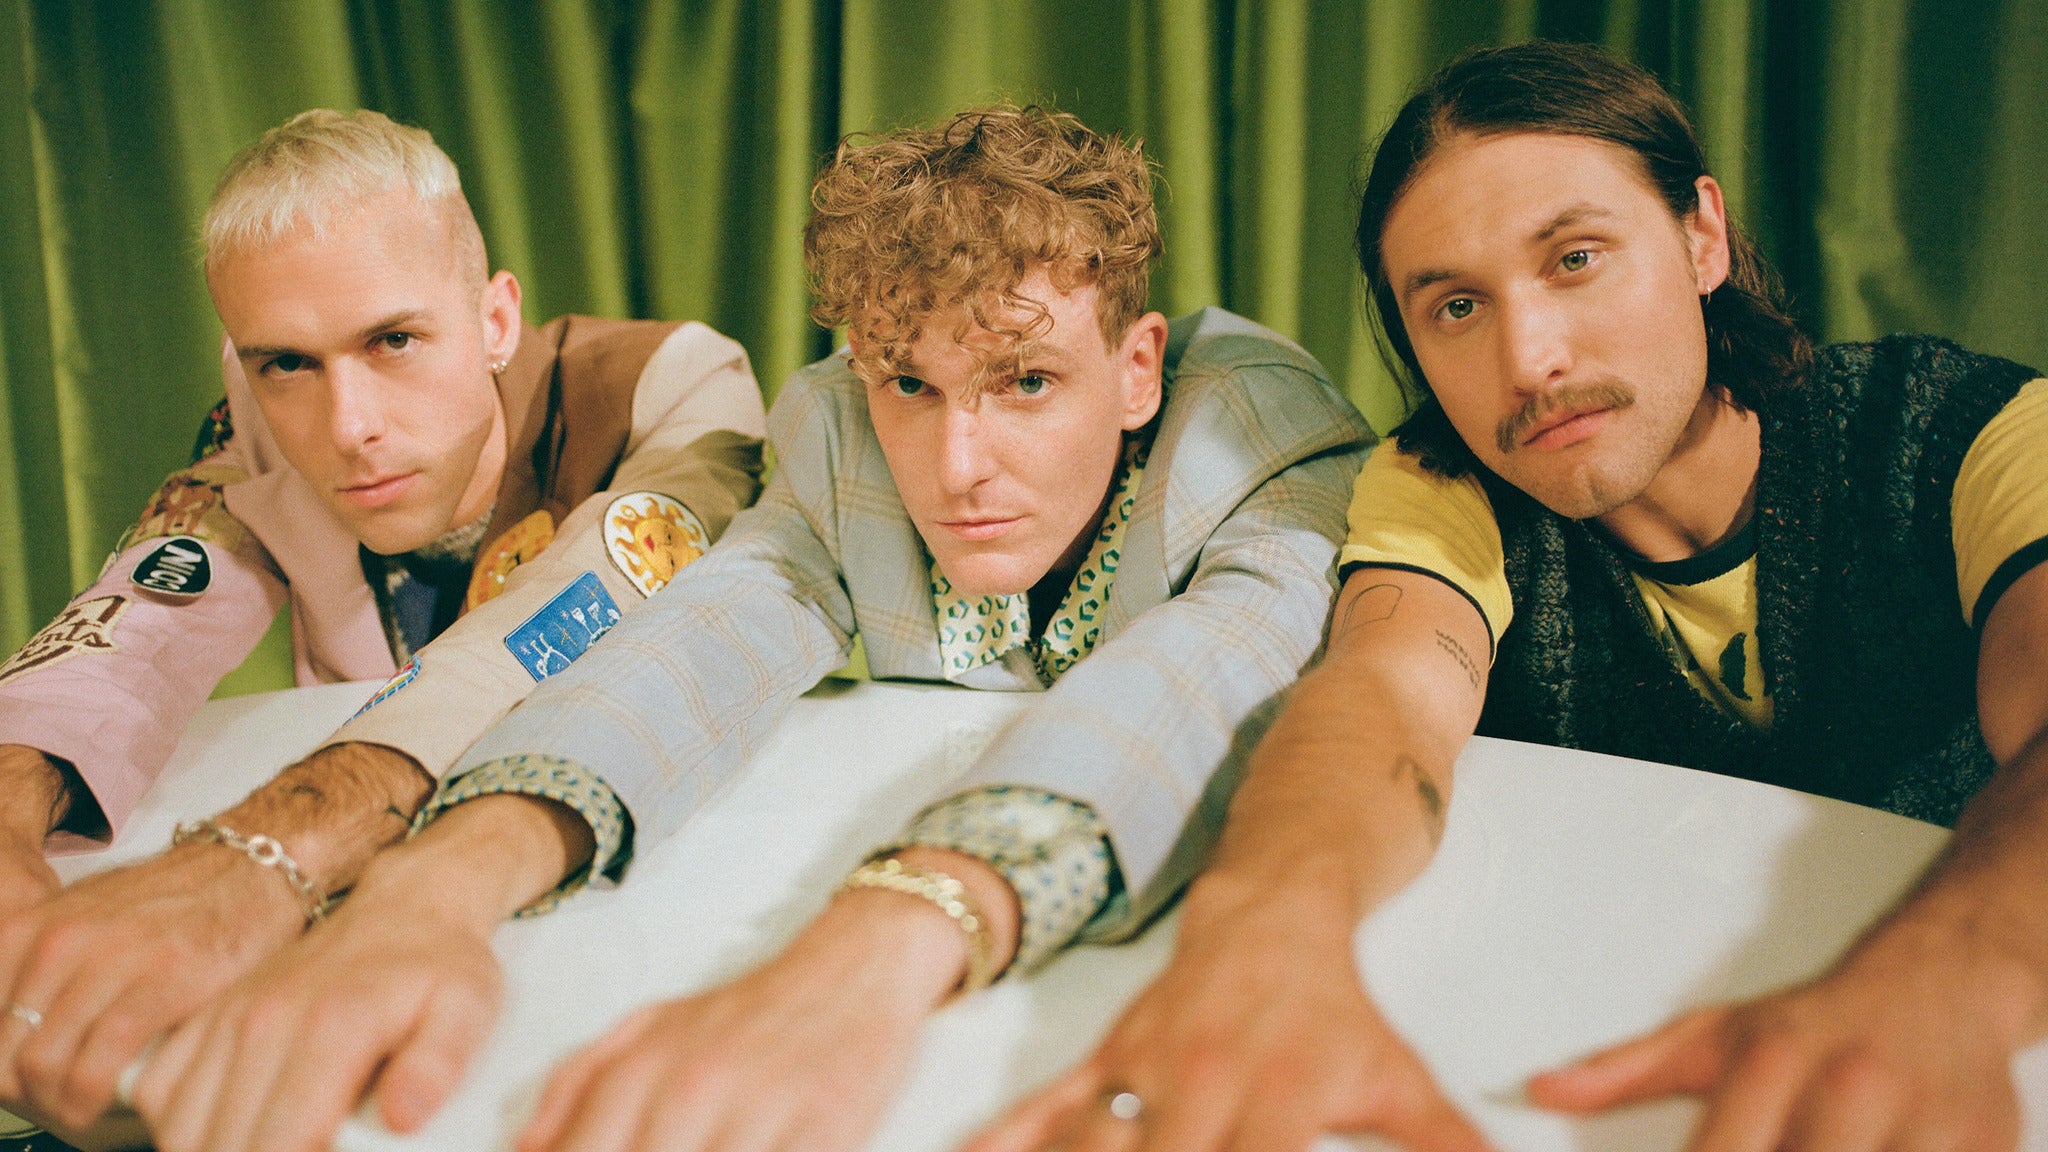 COIN: Rainbow Dreamland Tour in Baltimore promo photo for Spotify presale offer code